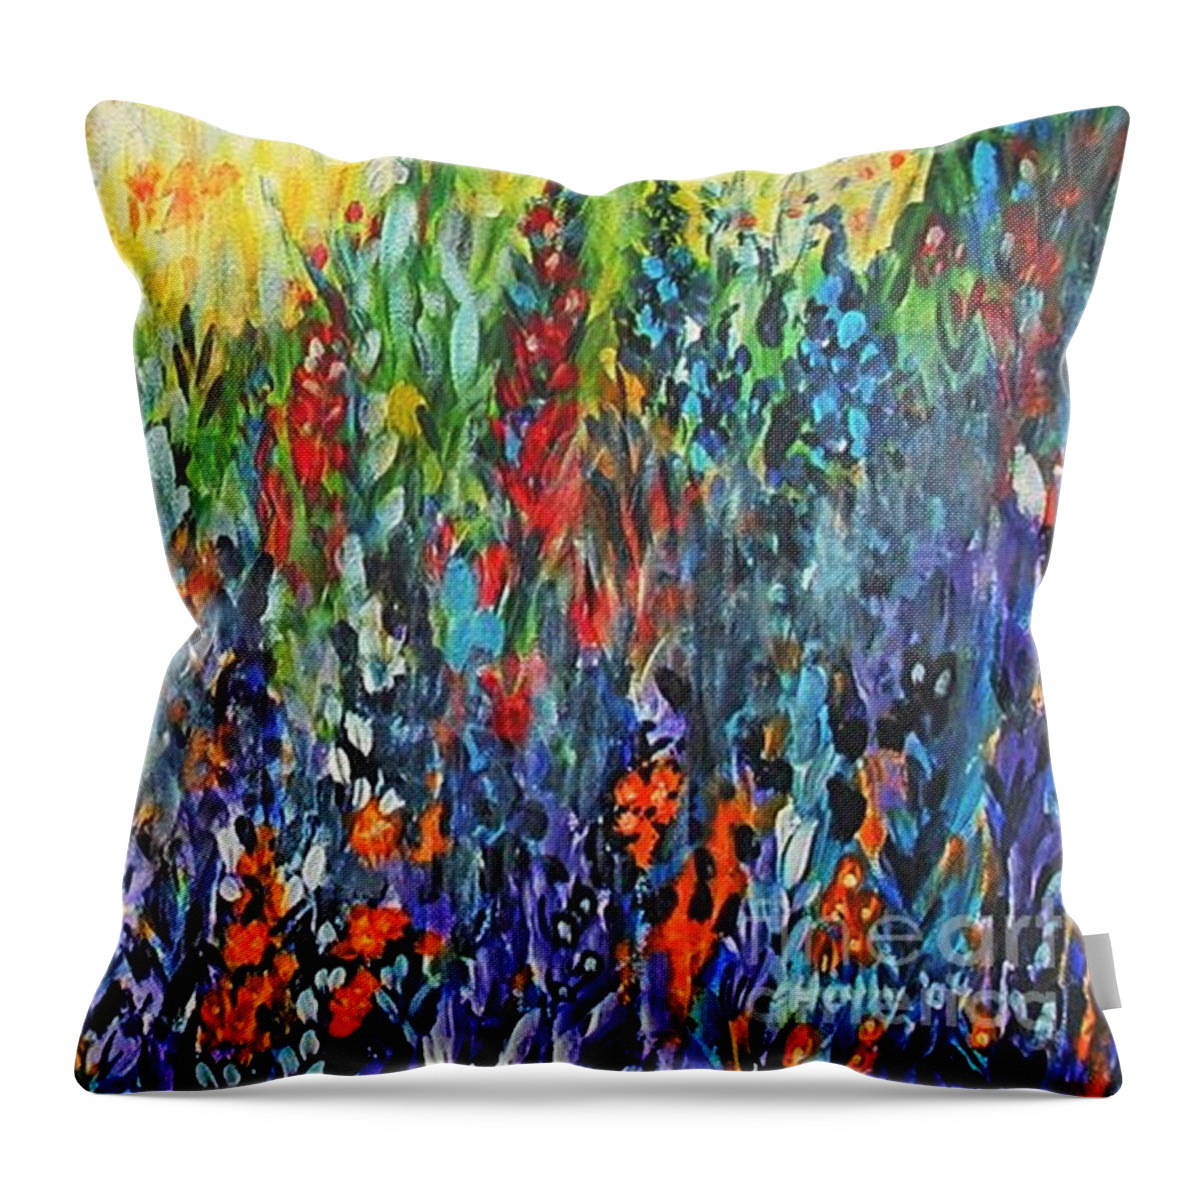 Glowy Clearing Throw Pillow featuring the painting Glowy Clearing by Holly Carmichael